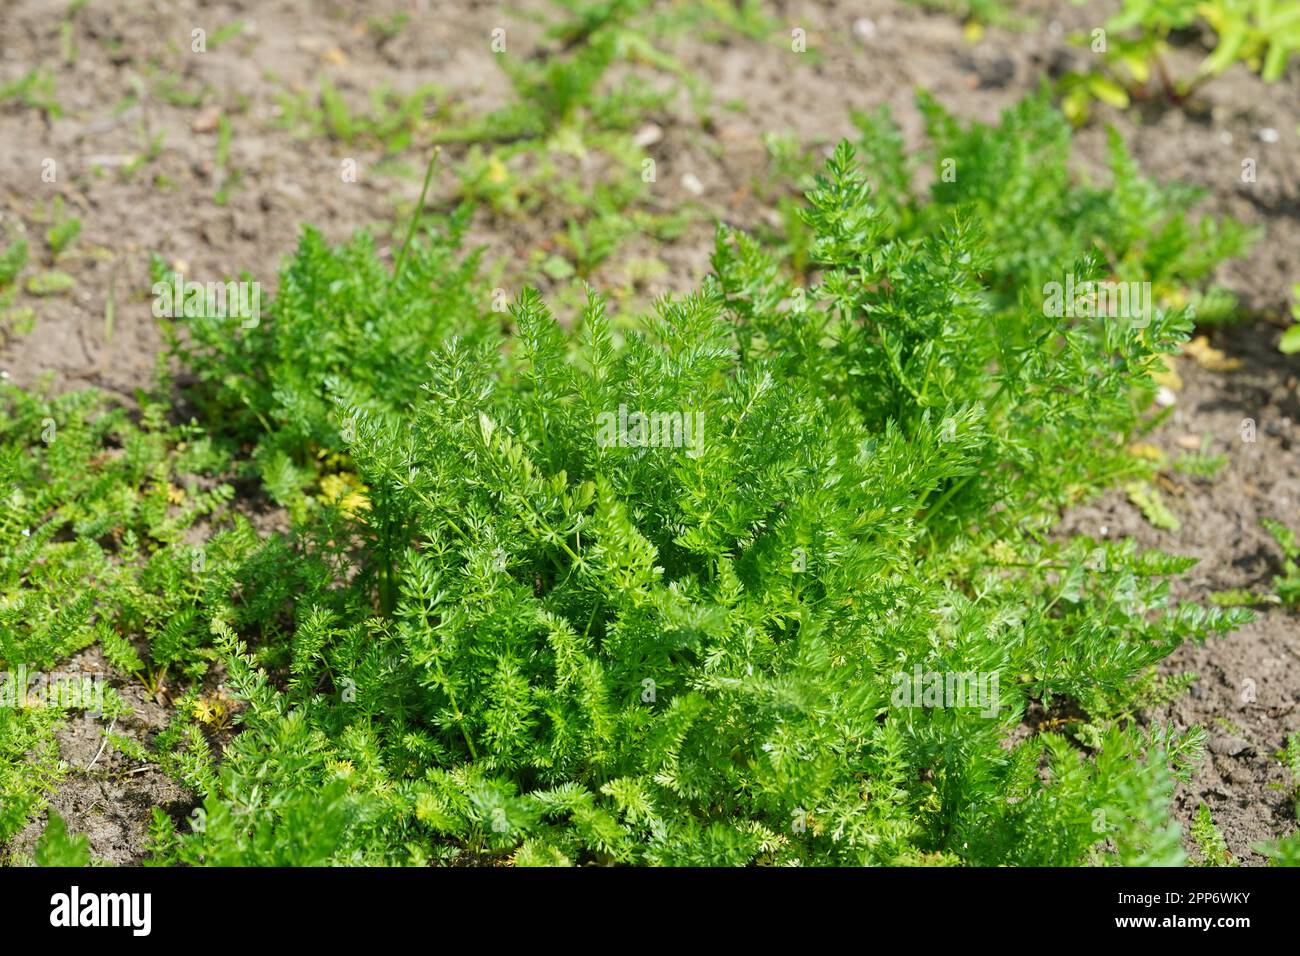 Genuine caraway, Carvi, Kümmel,Caraway is a biennial semi-rosette plant with a root turnip. Stock Photo